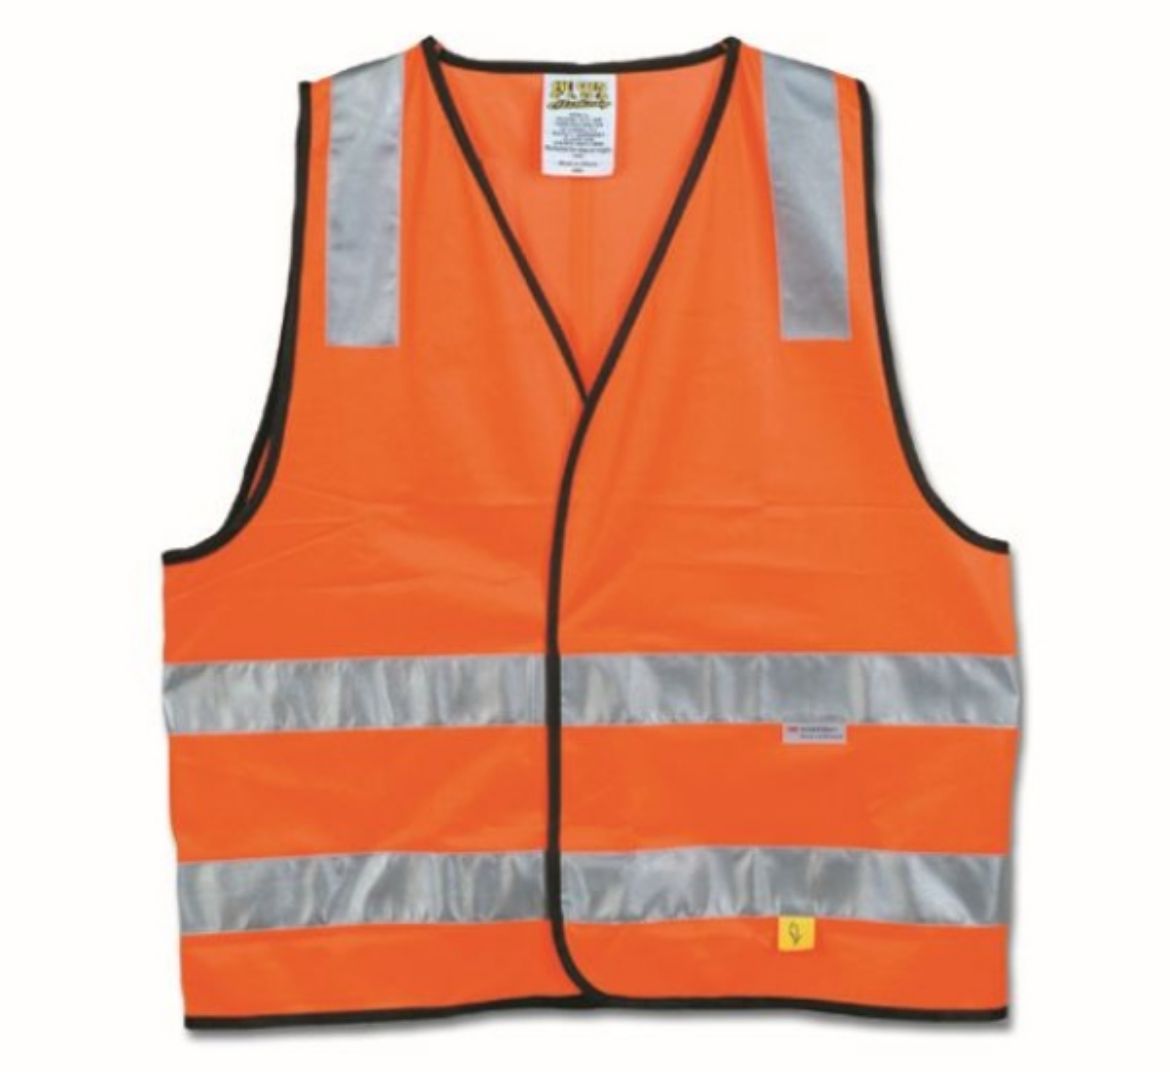 Picture of HI-VIS ORANGE SAFETY VEST - DAY/NIGHT USE - SMALL